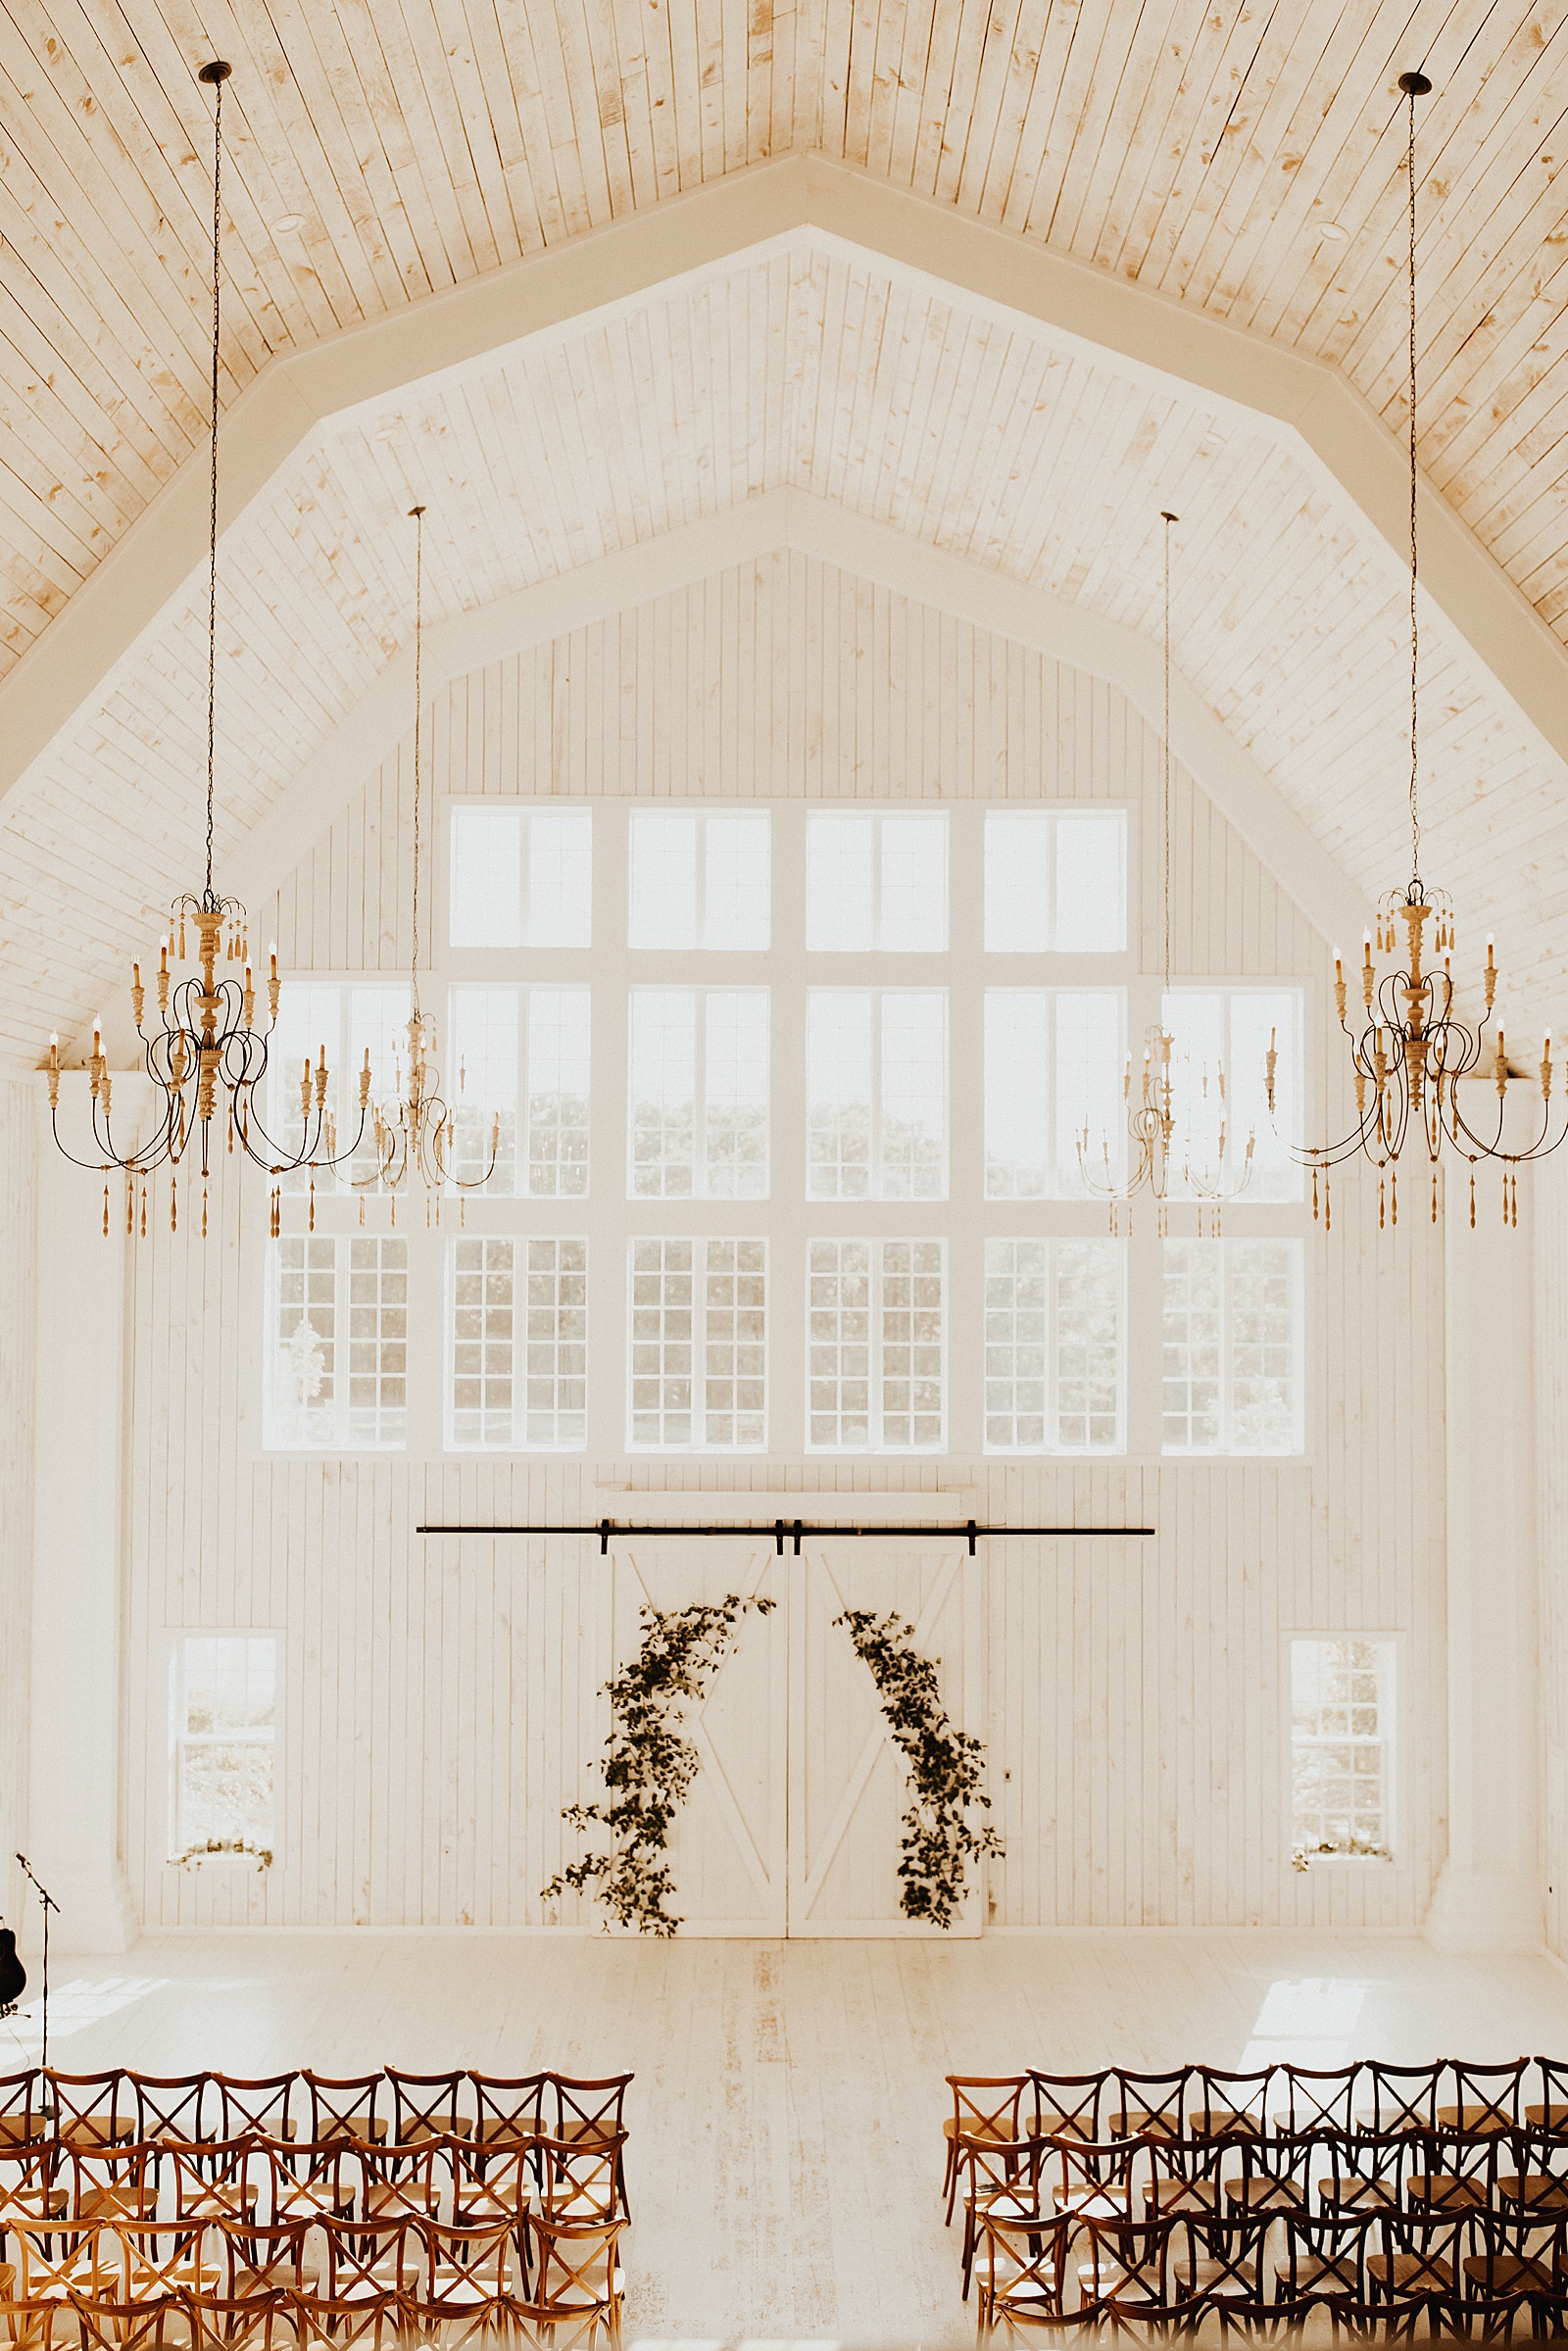 Photos of the most gorgeous wedding venue, The White Sparrow barn in Dallas, TX.